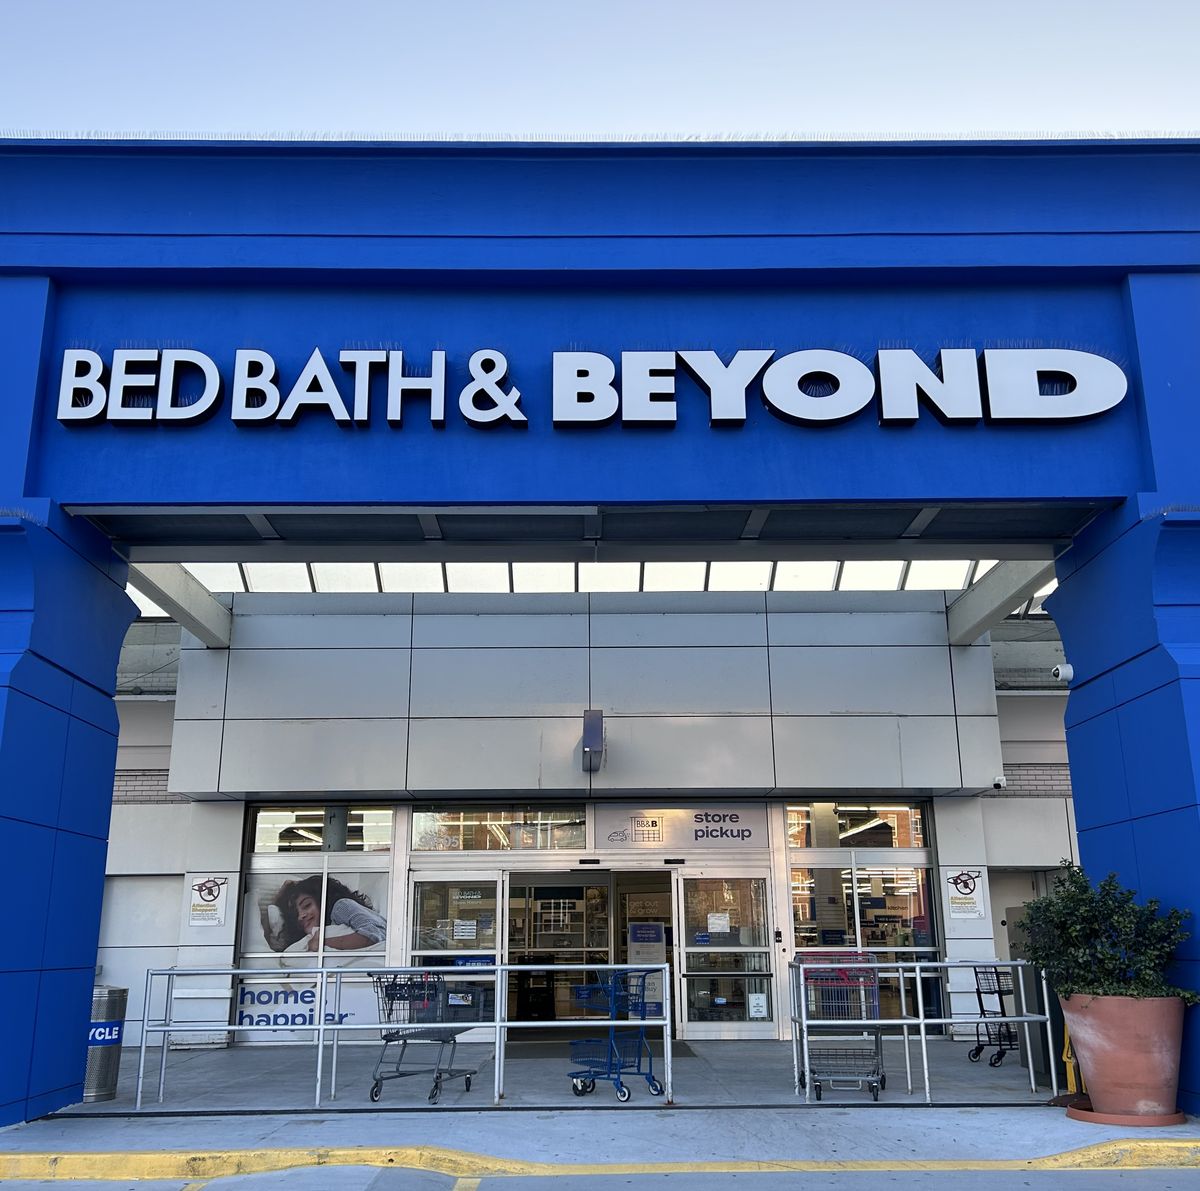 Bed Bath & Beyond to close 60 stores 